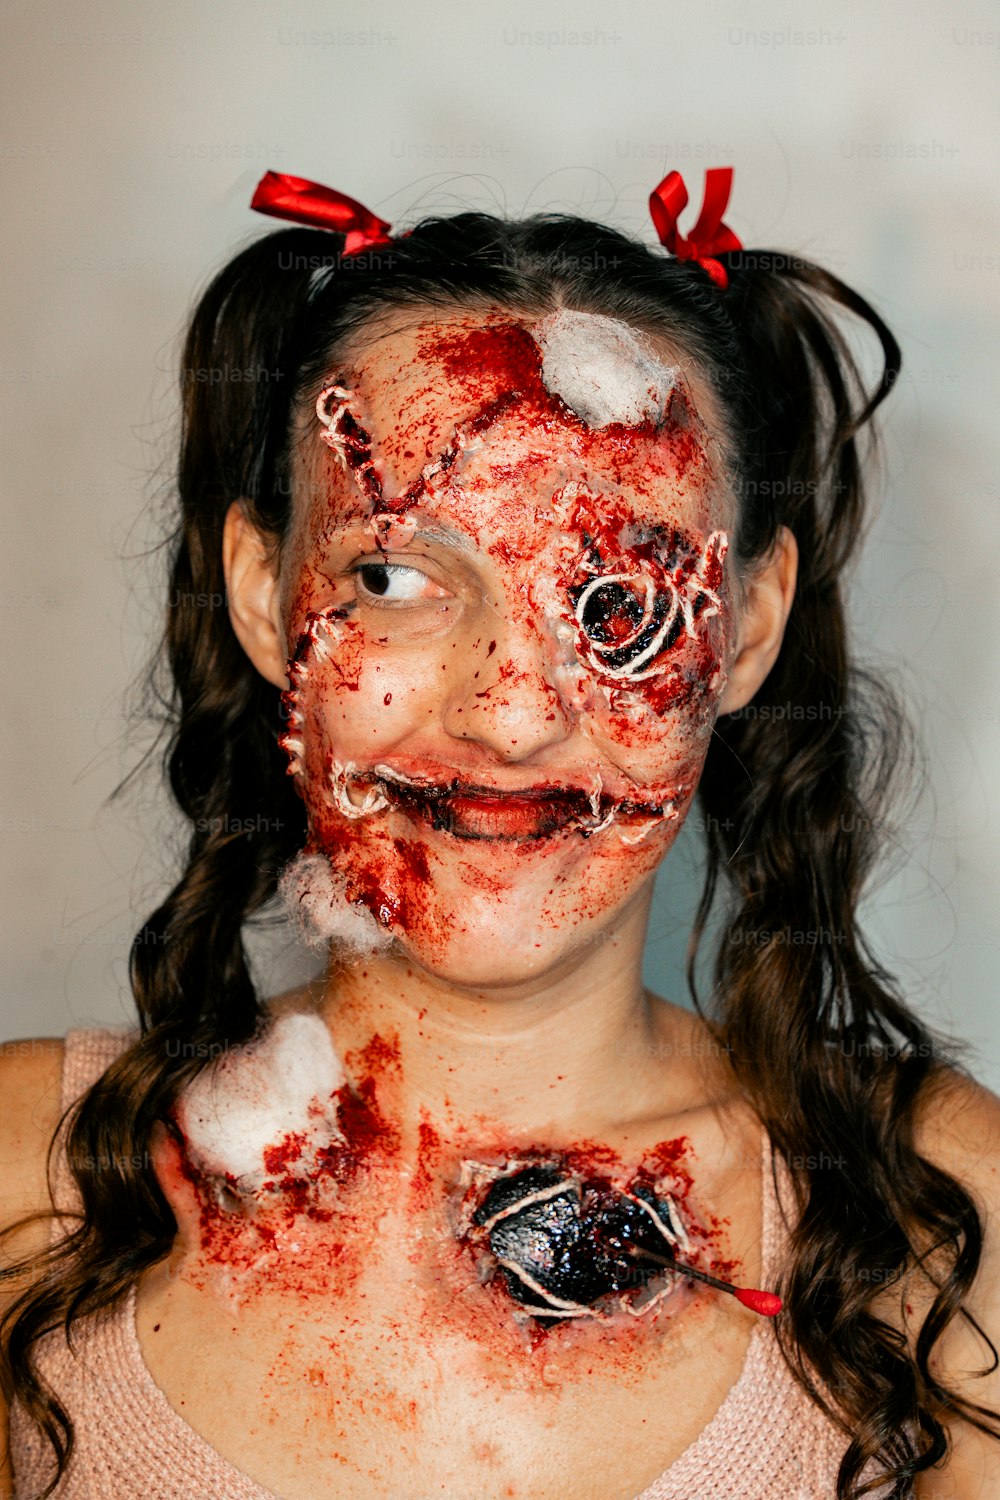 a young girl with blood smeared all over her face